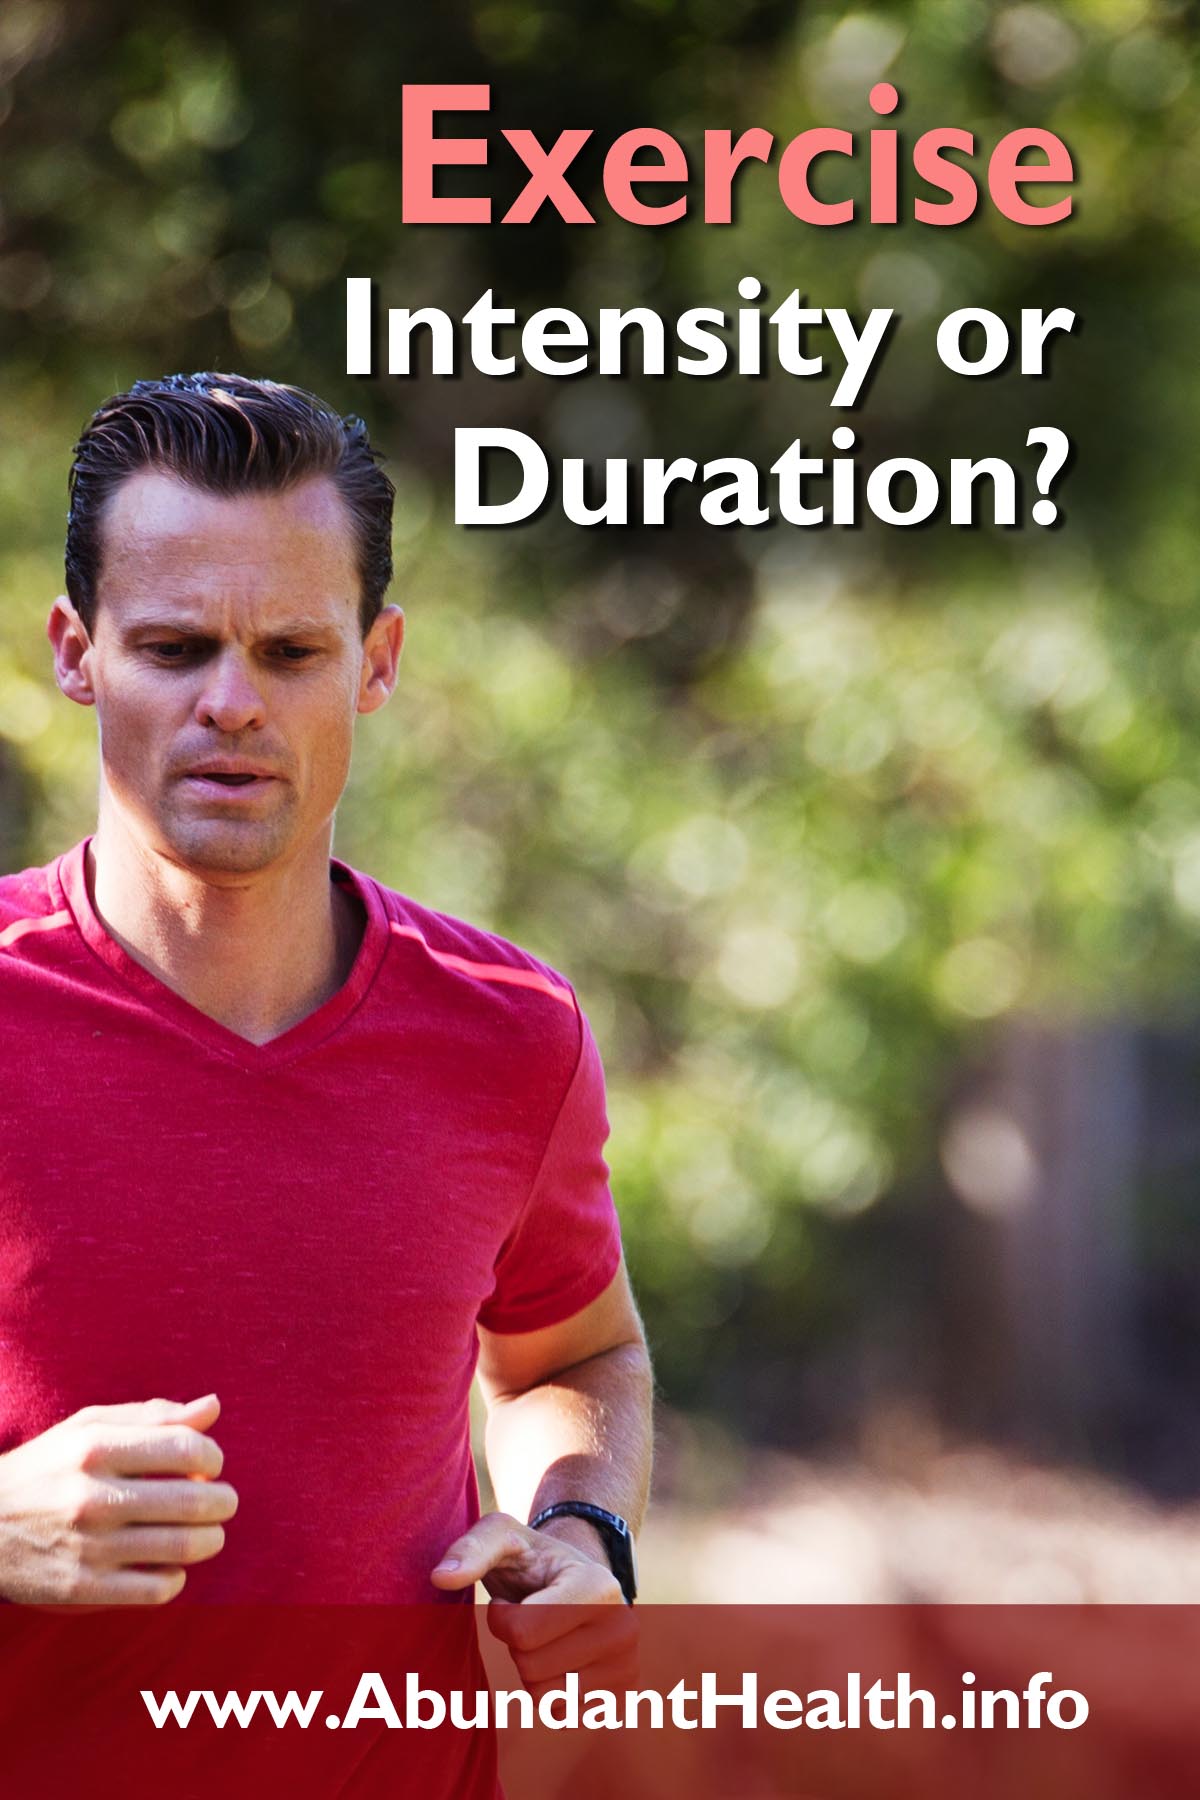 Exercise - Intensity or Duration?